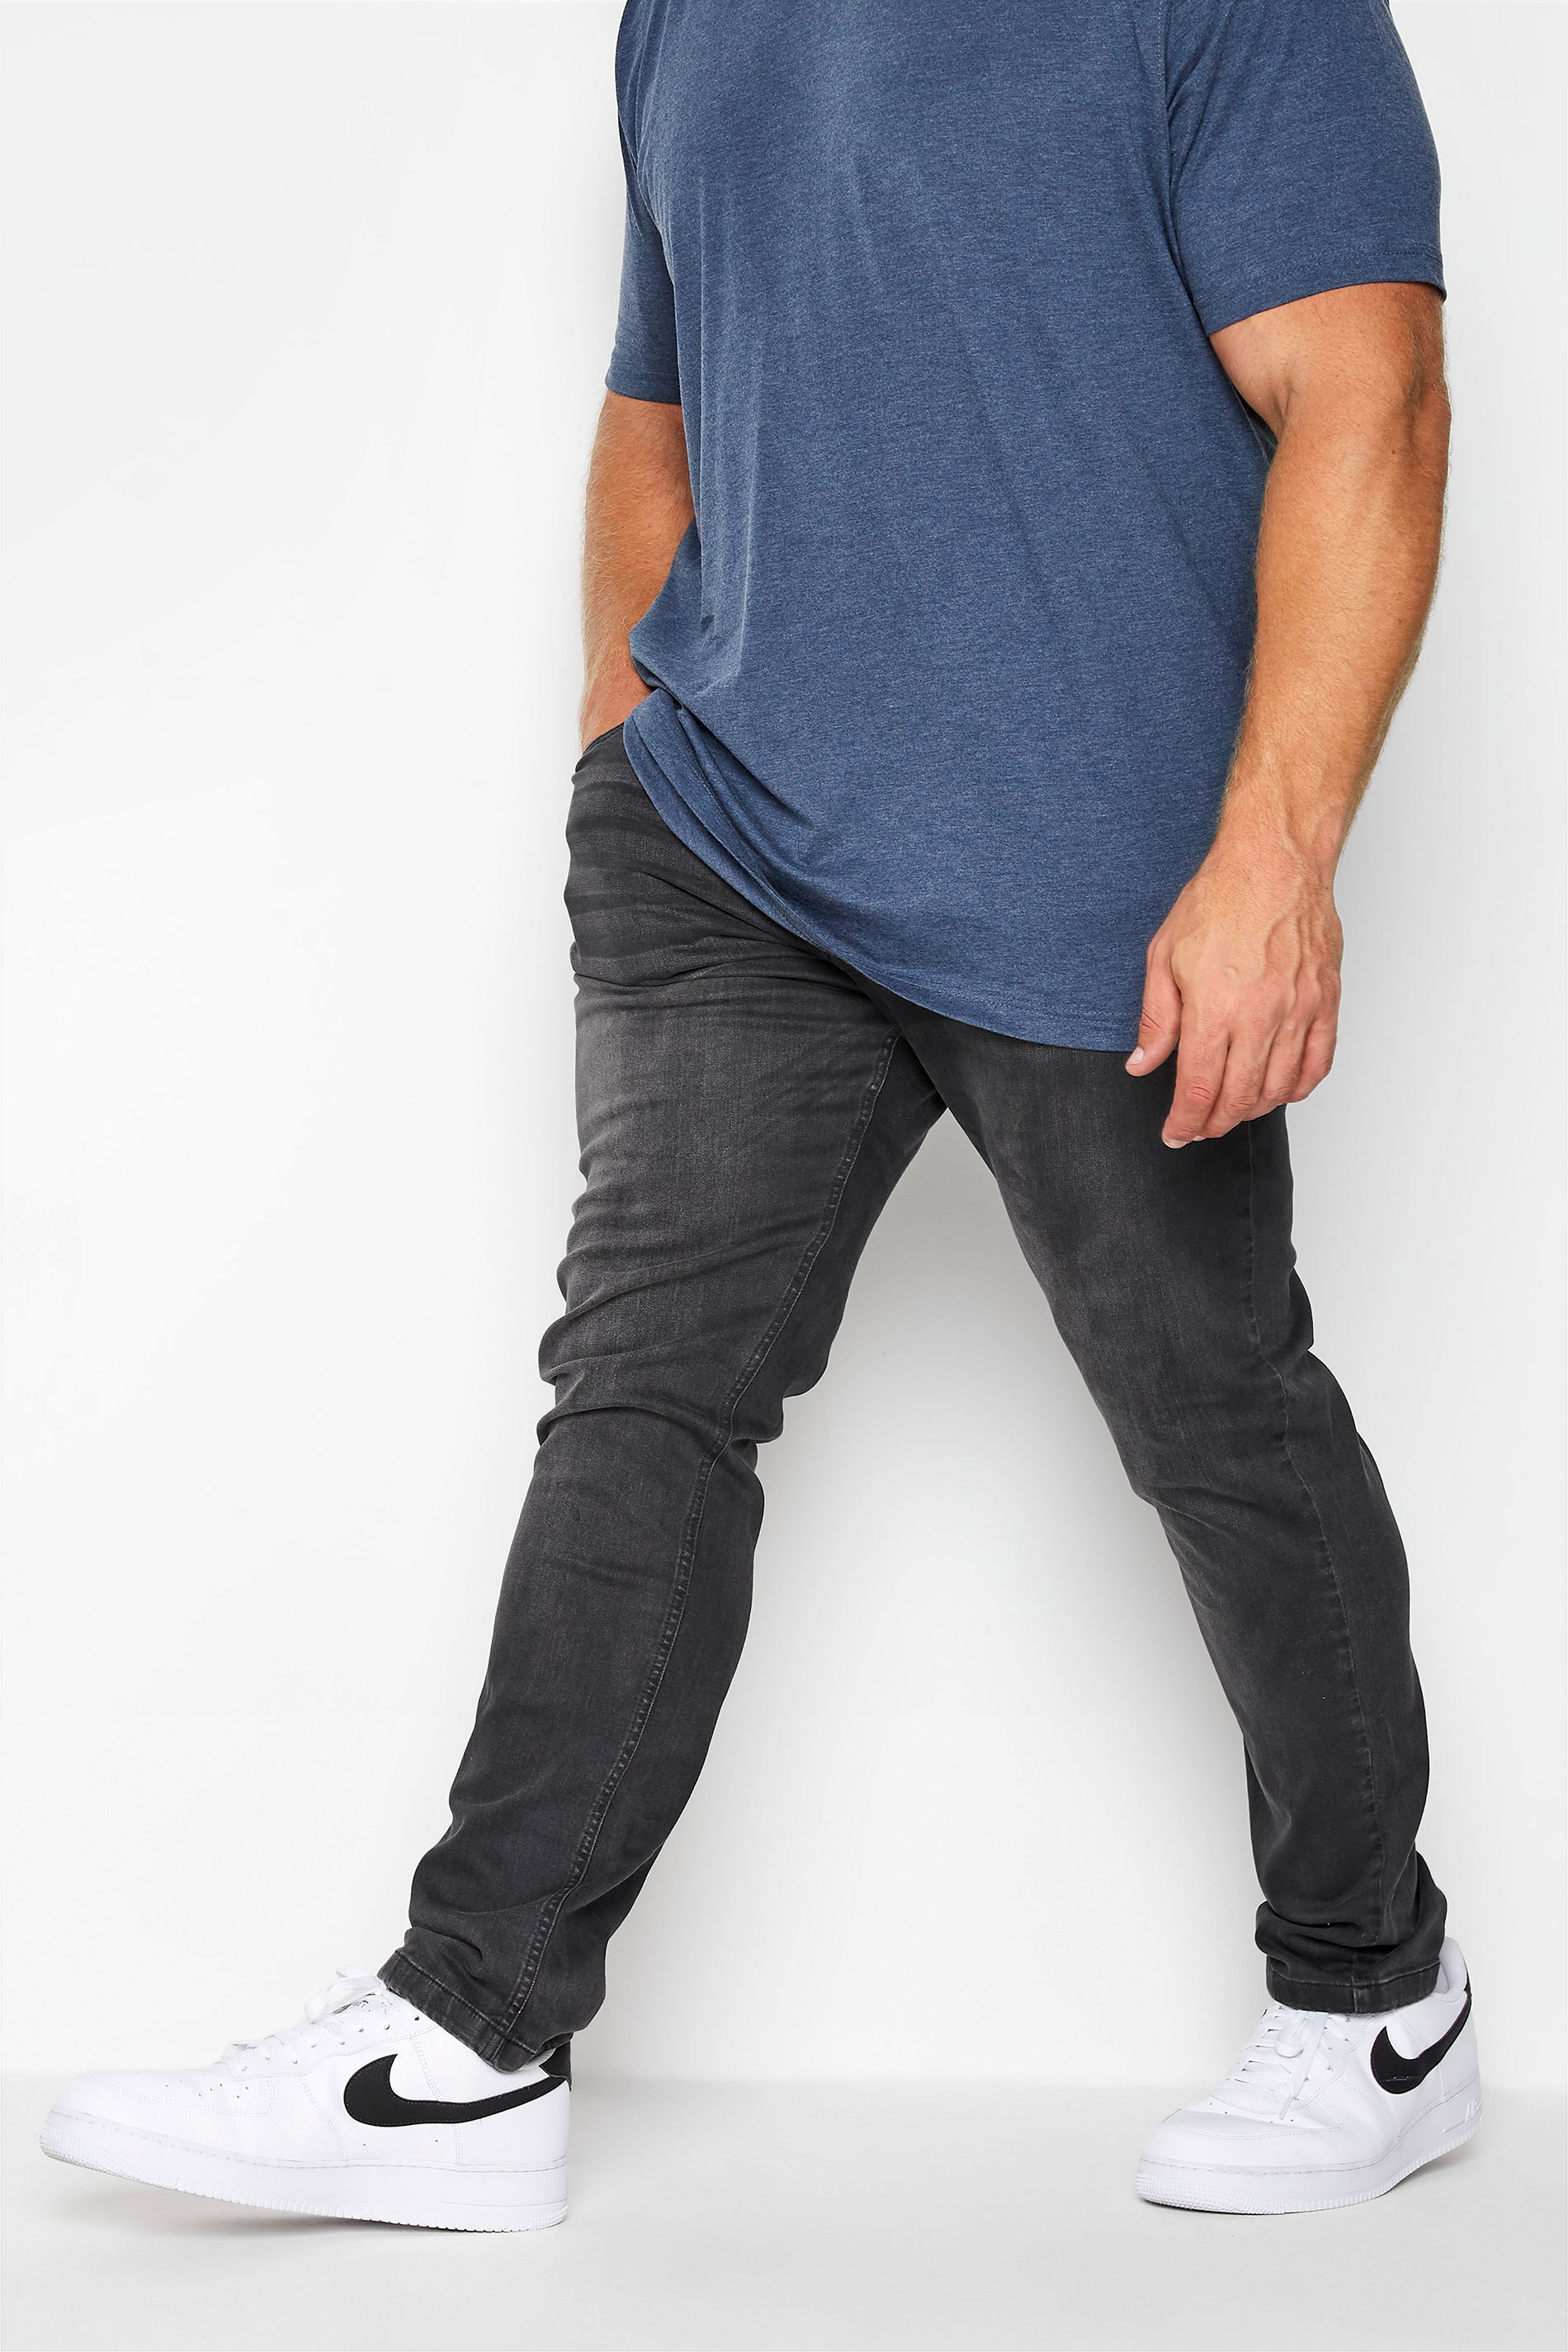 D555 Grey Tapered Stretch Jeans | BadRhino 1